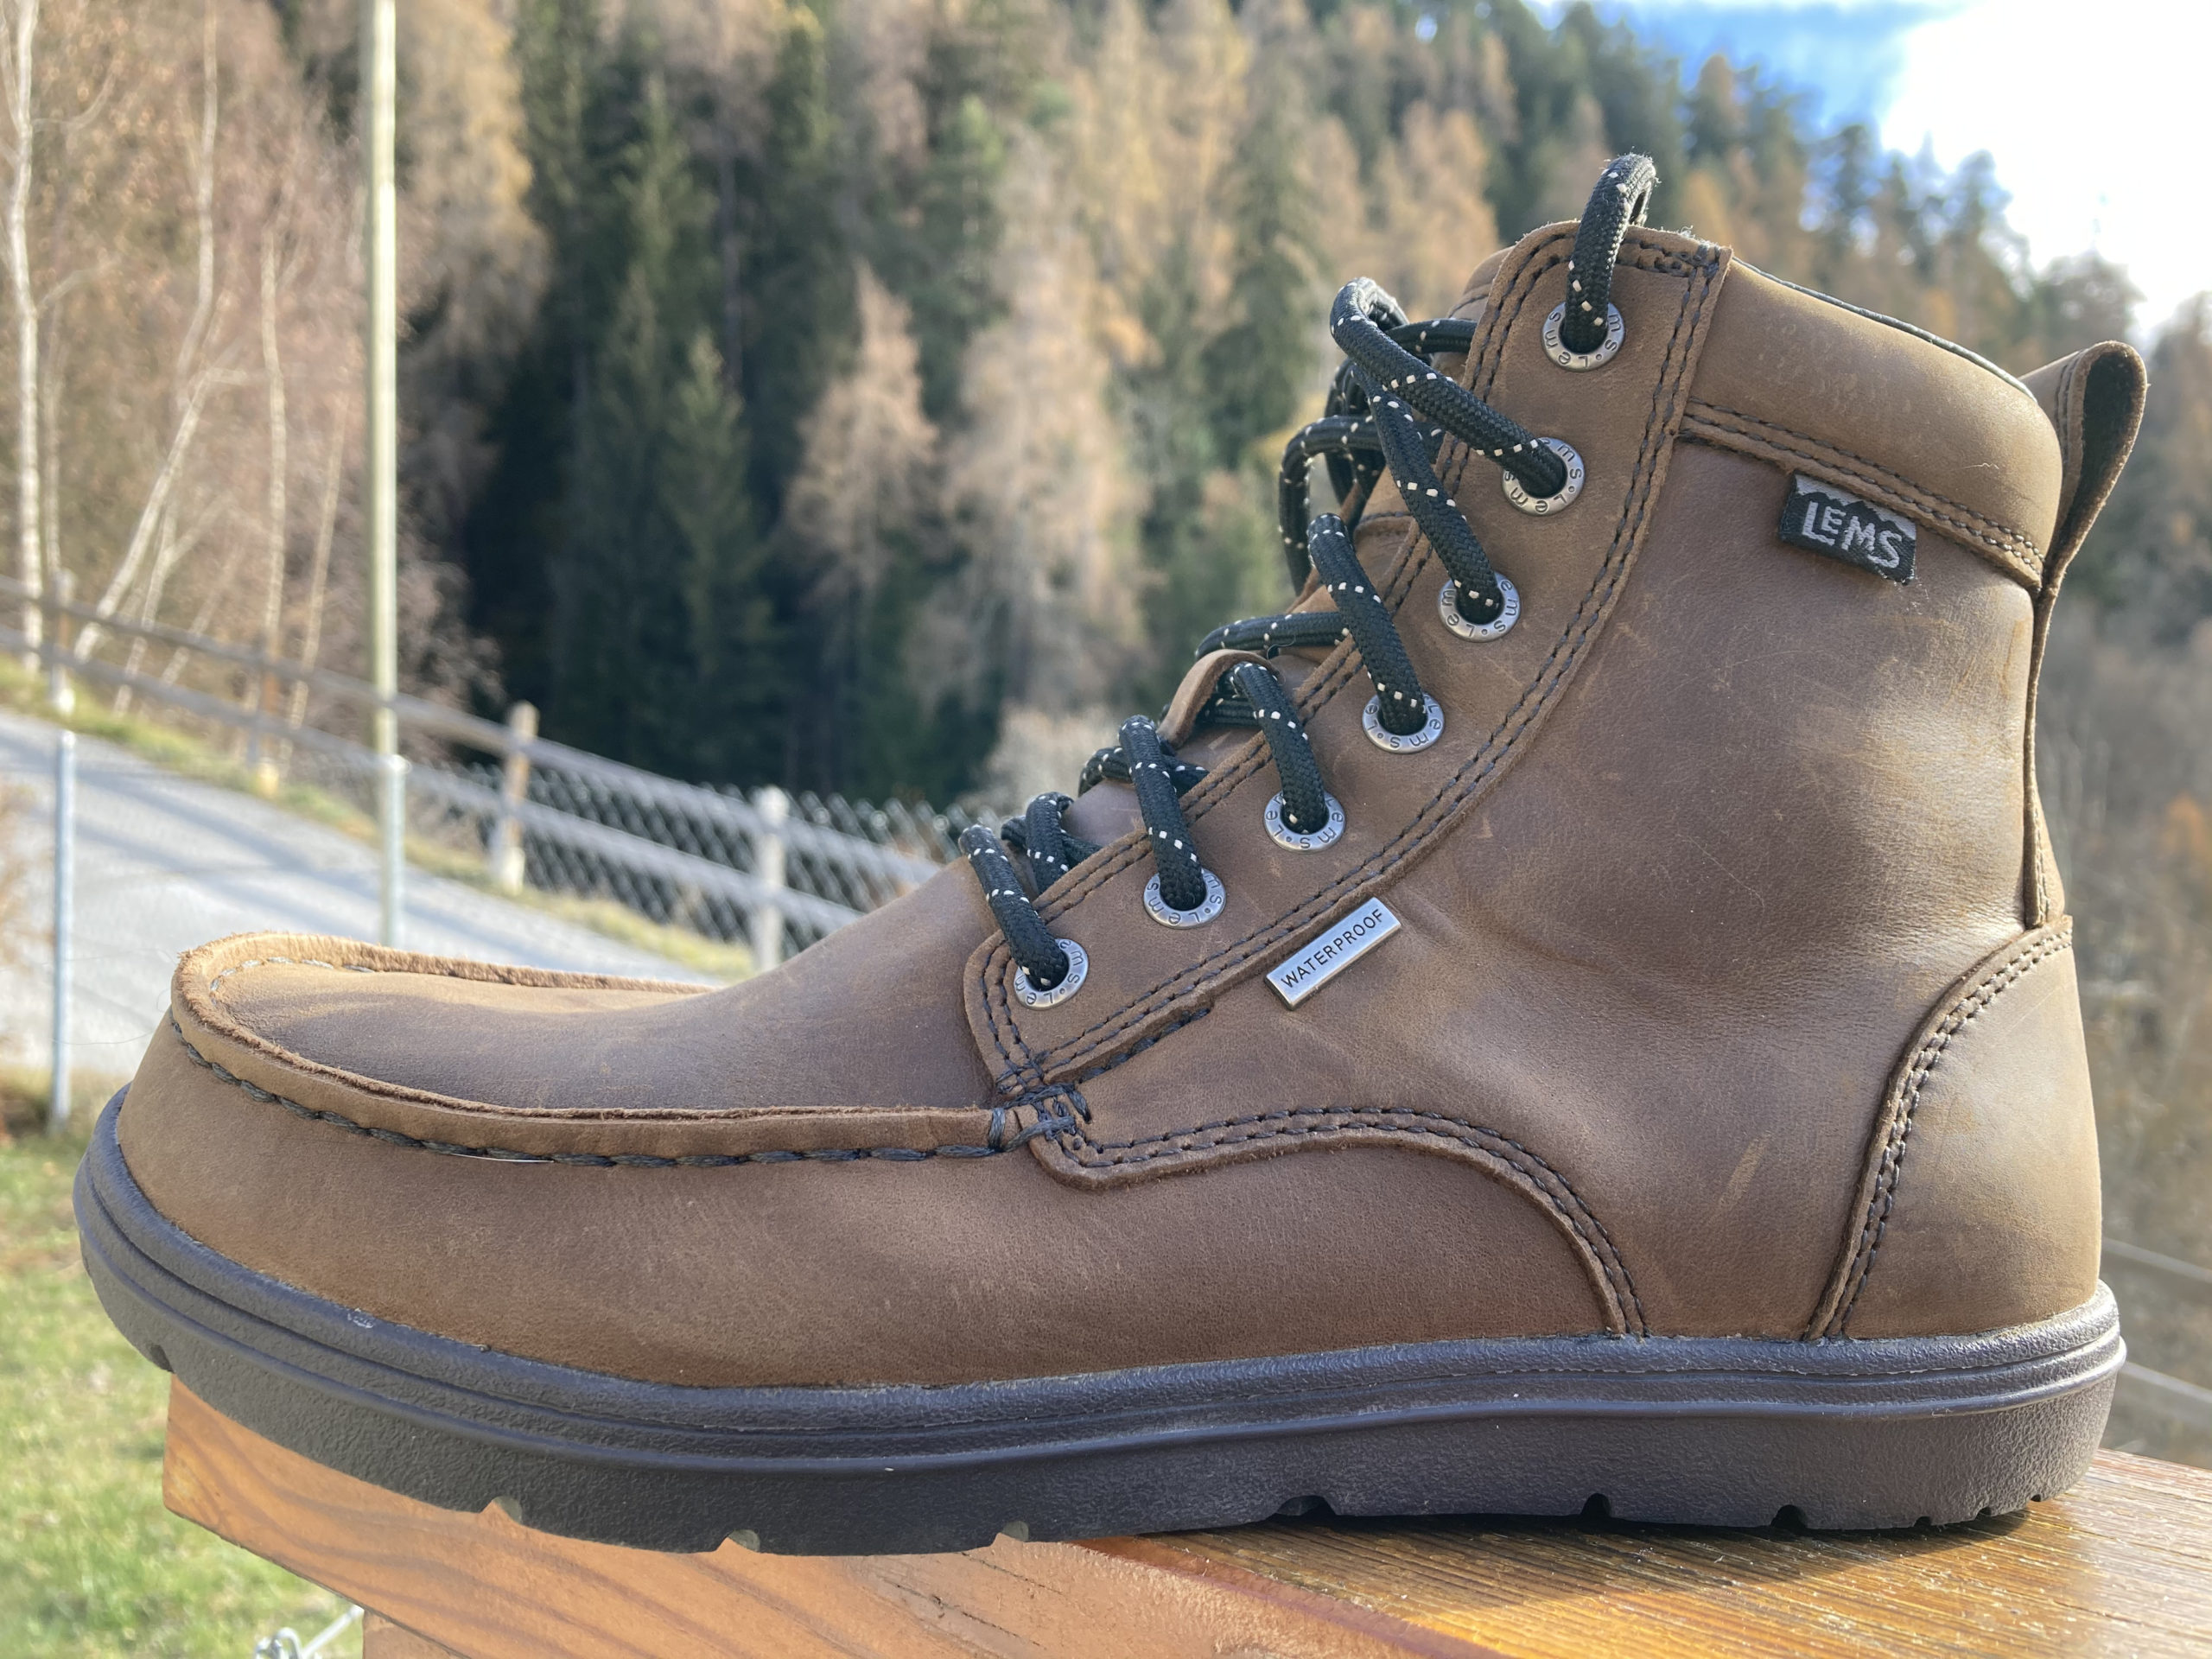 Unboxing all 3 Timberland Supreme Field Boots! 